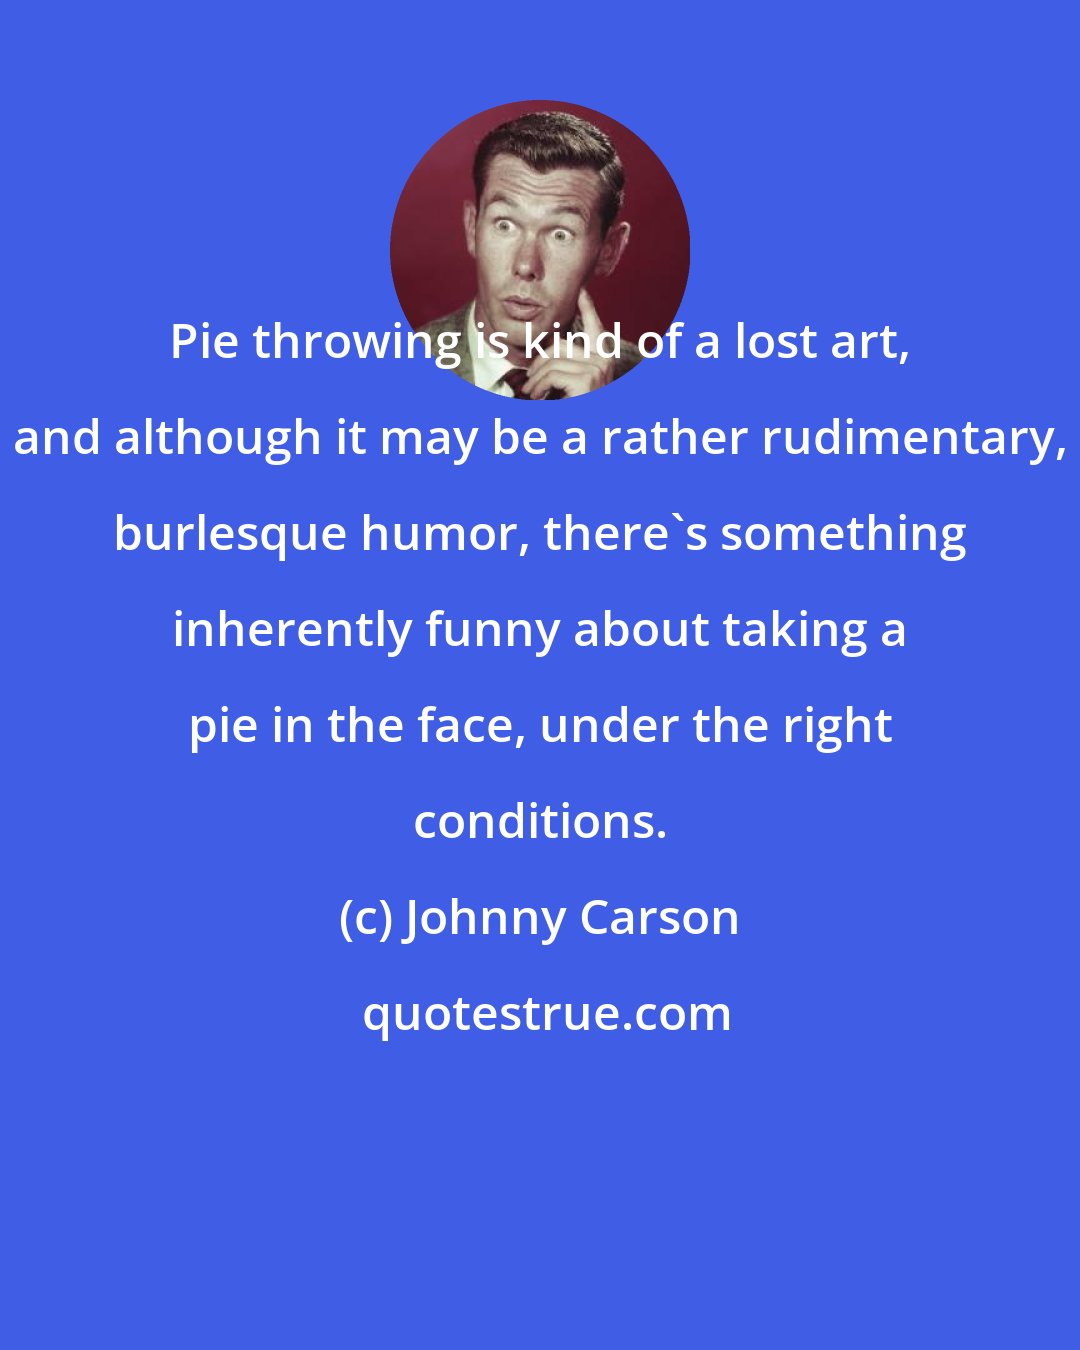 Johnny Carson: Pie throwing is kind of a lost art, and although it may be a rather rudimentary, burlesque humor, there's something inherently funny about taking a pie in the face, under the right conditions.